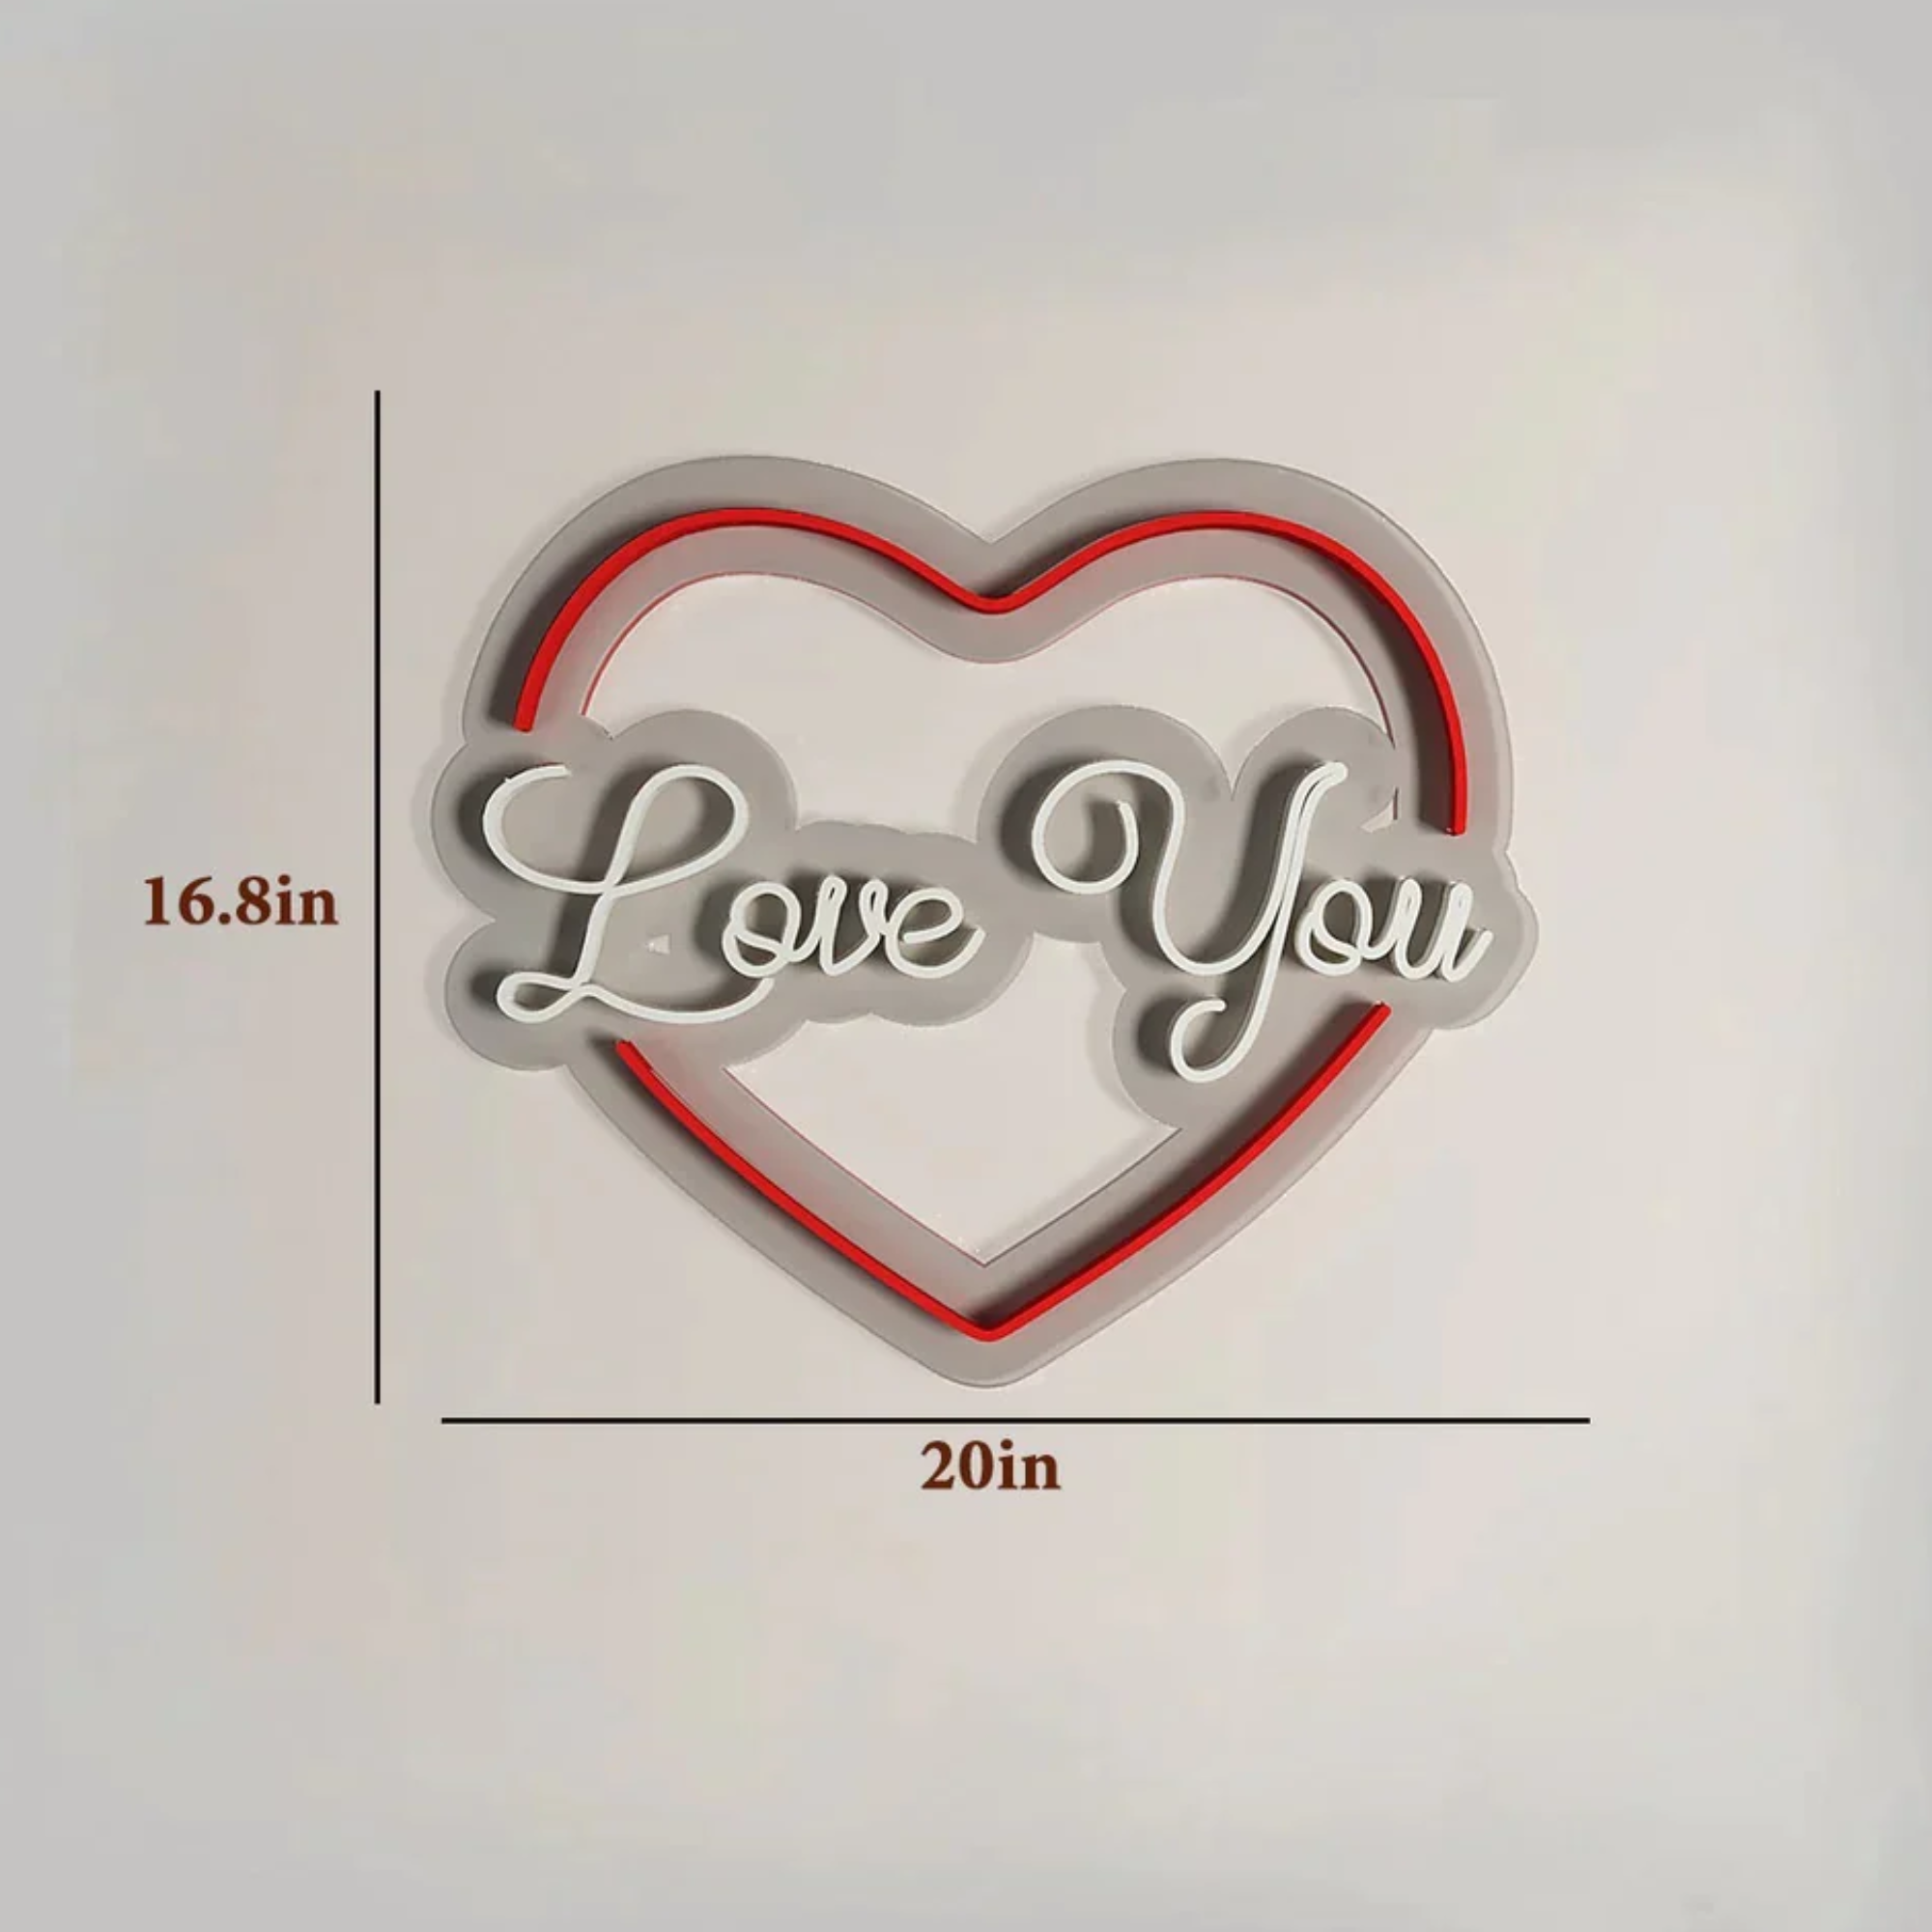 Love You Text in Heart Design Neon LED Light